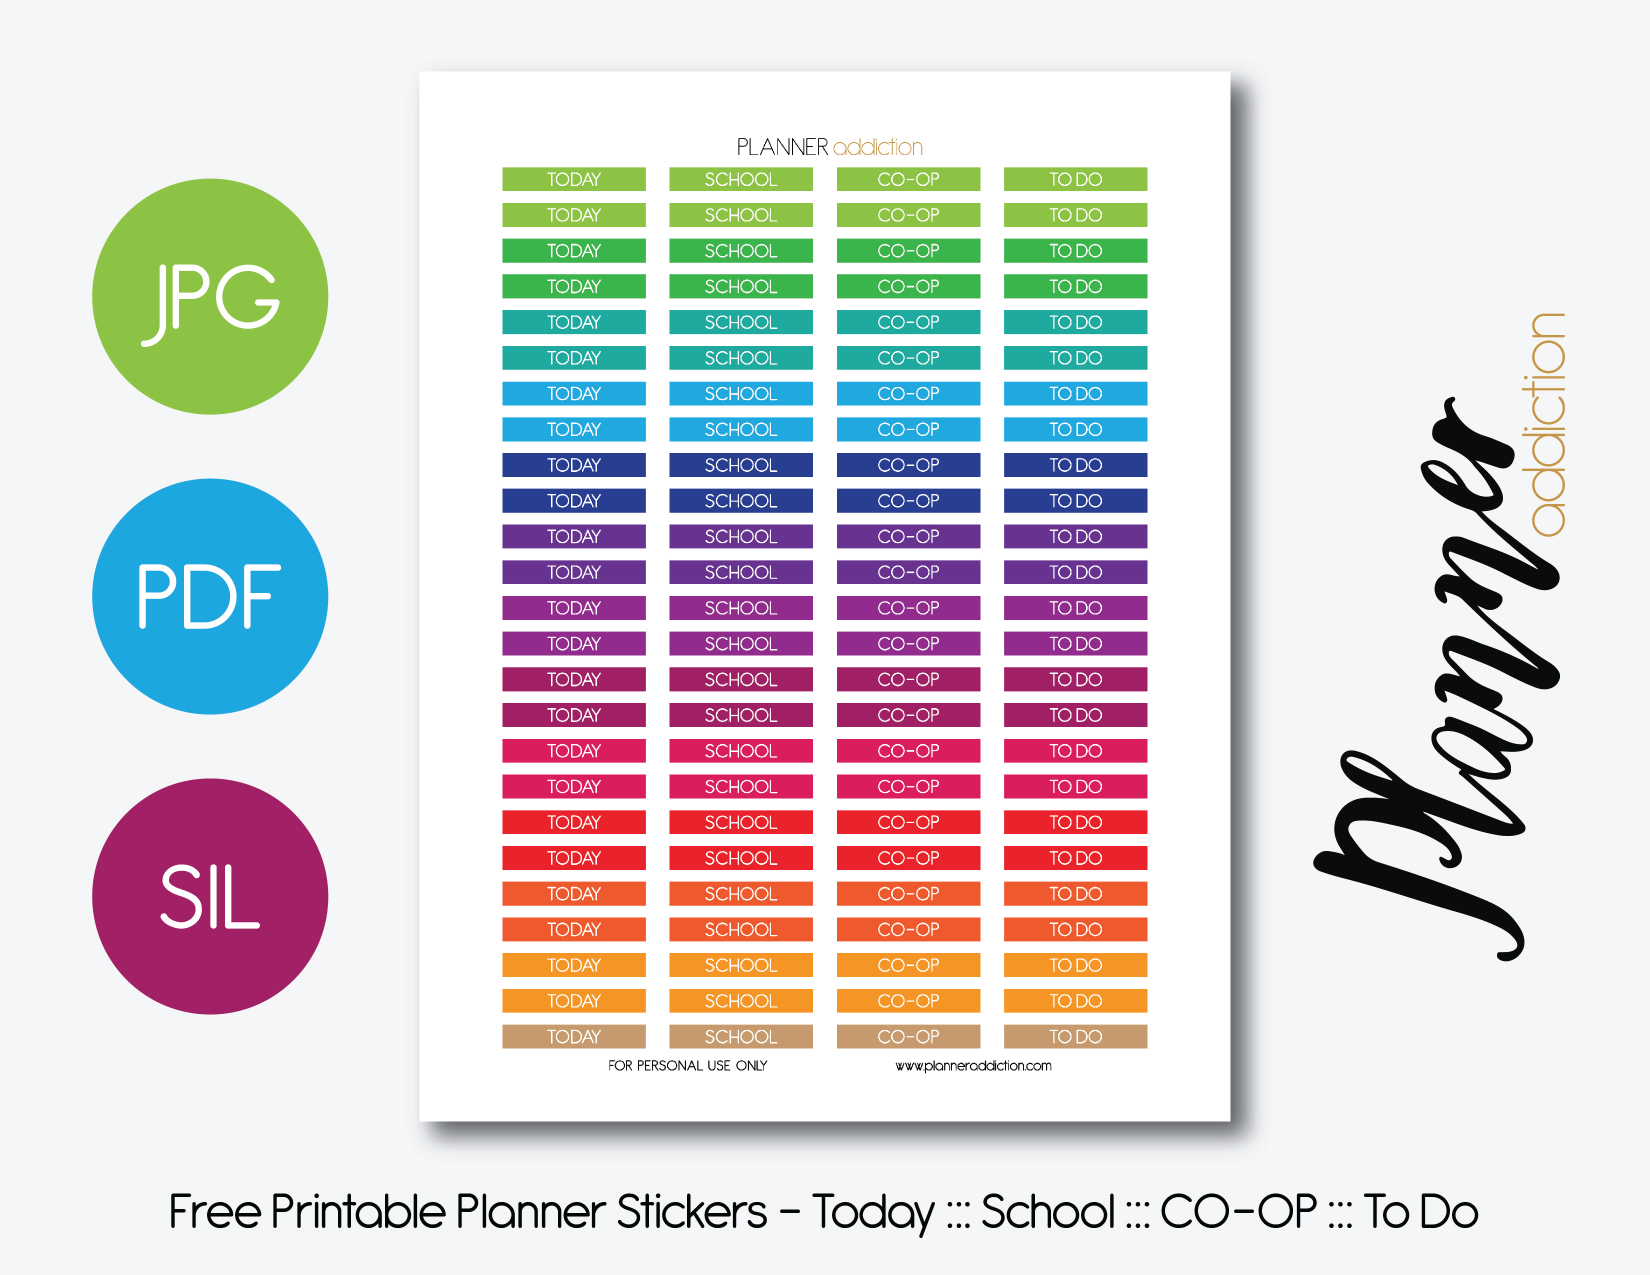 Free Printable Planner Stickers – Planner Addiction - Free Printable Stickers For Teachers